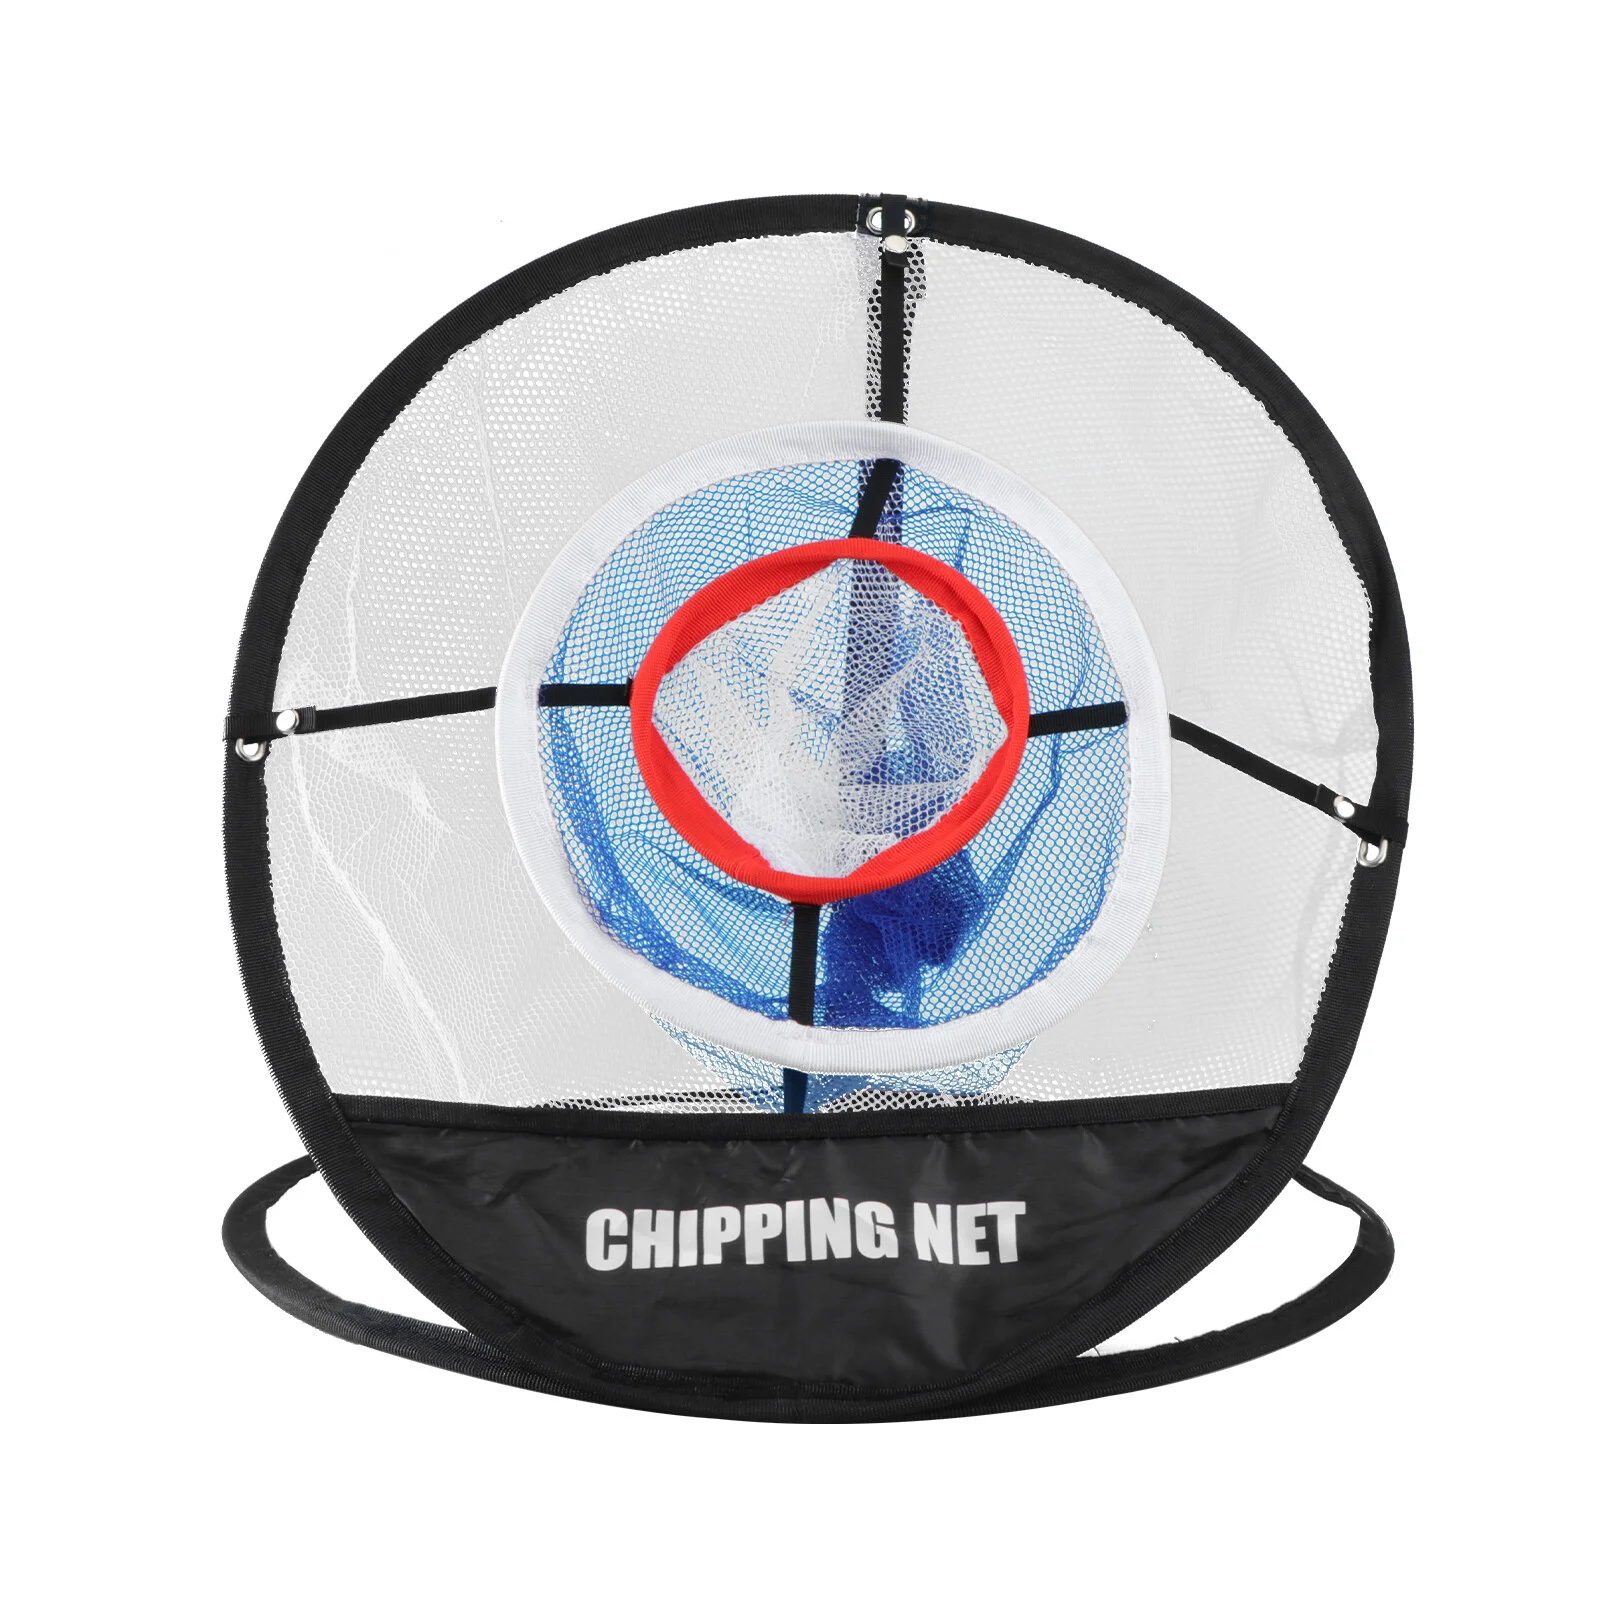 

Up Chipping Net Indoor Outdoor Collapsible Golfing Target Net for Practice